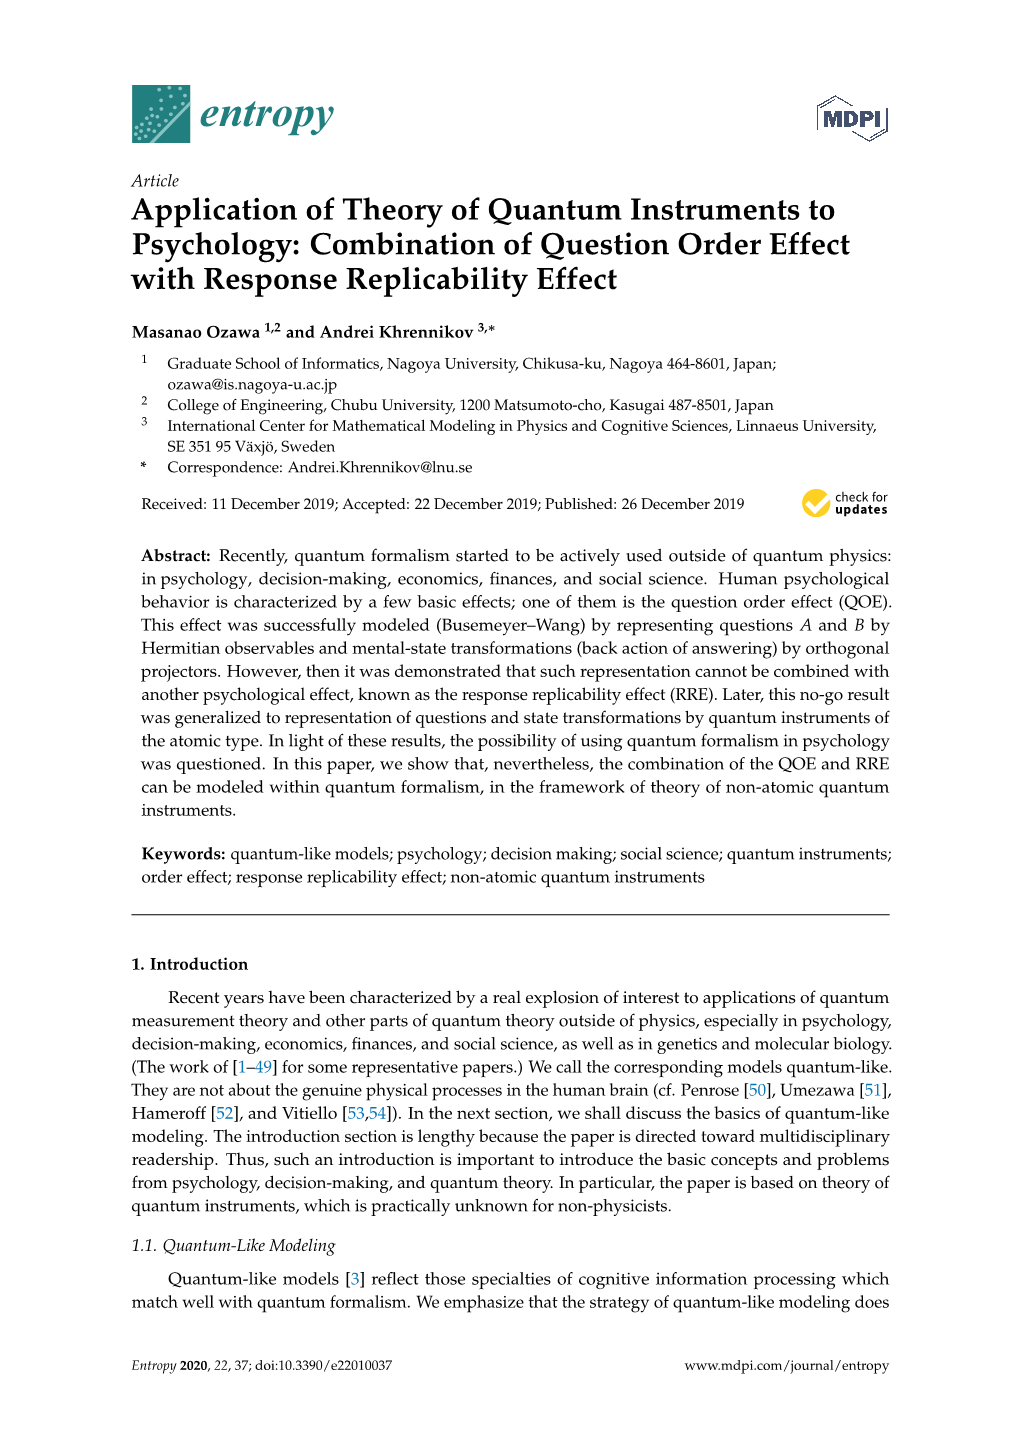 Application of Theory of Quantum Instruments to Psychology: Combination of Question Order Effect with Response Replicability Effect